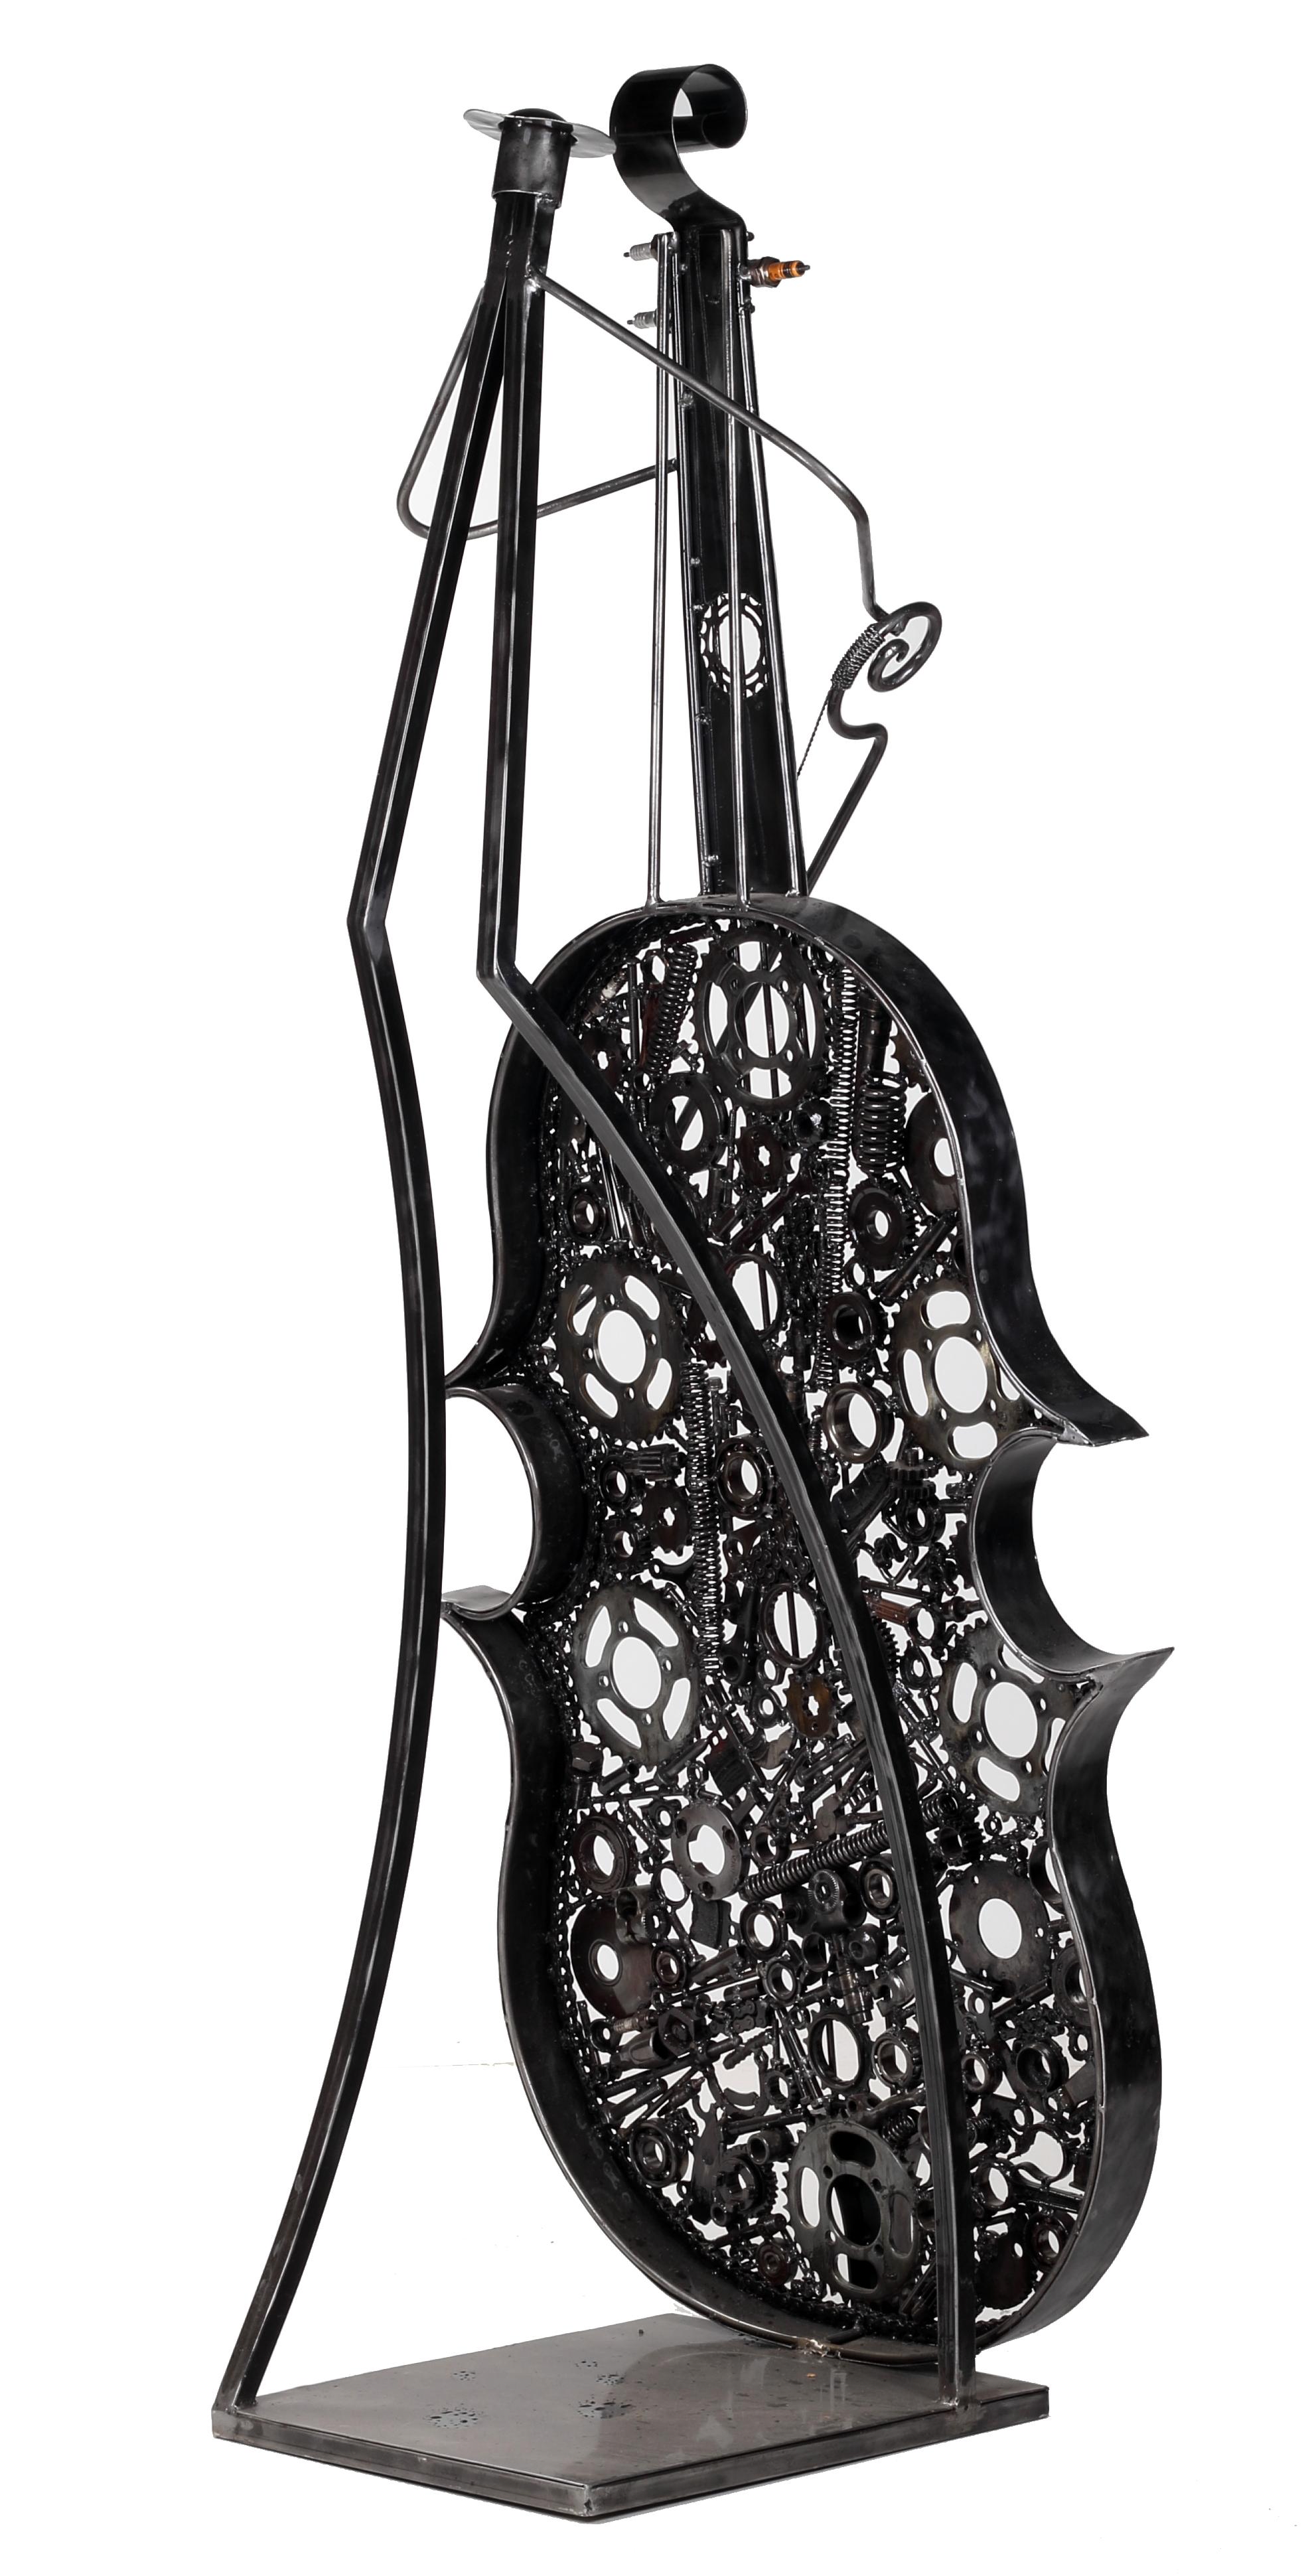 Spanish Iron Cello Sculpture Made by Hand with Recycled Motorcycle Parts